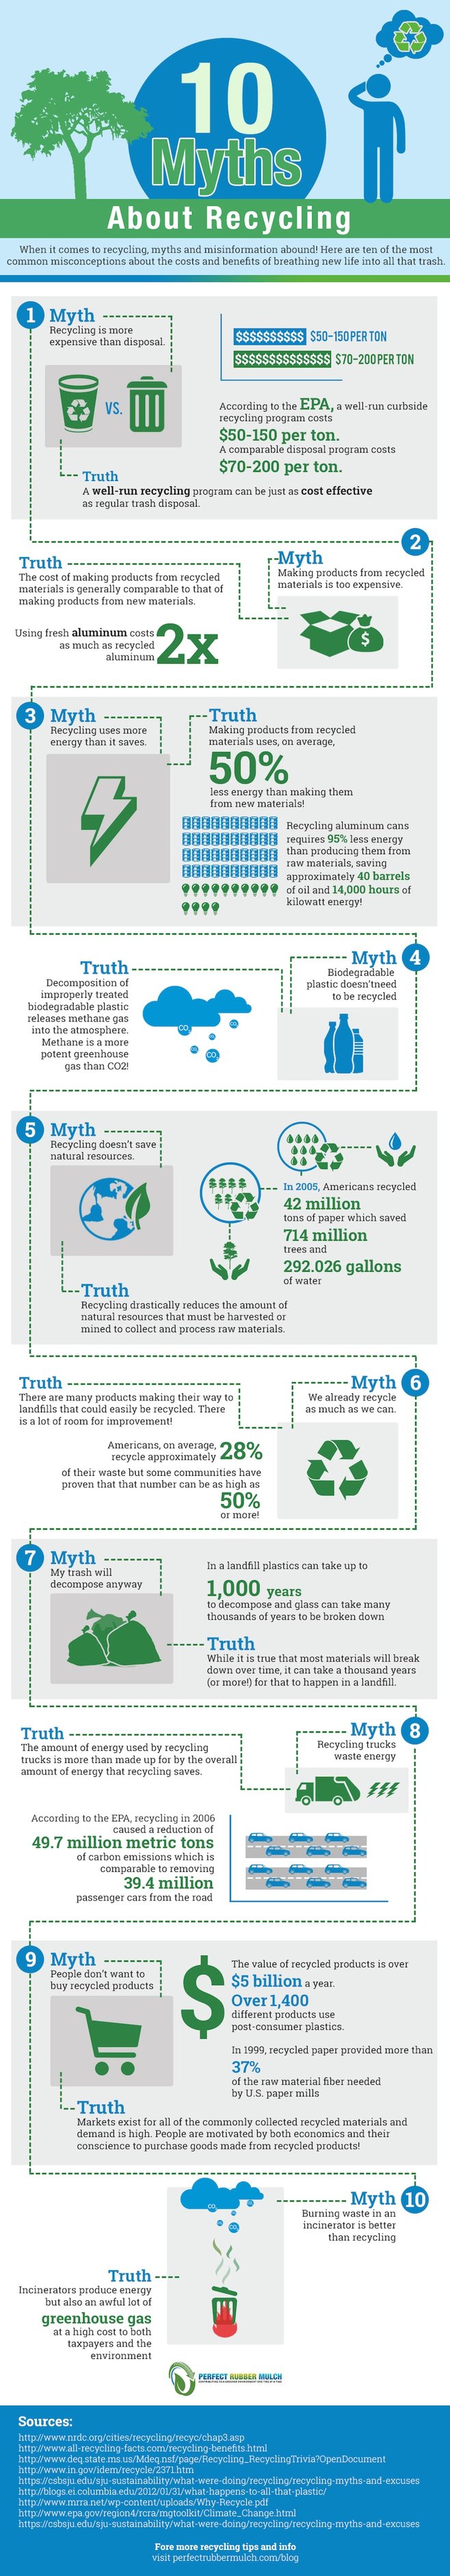 Recycling Myths Infographic.jpg